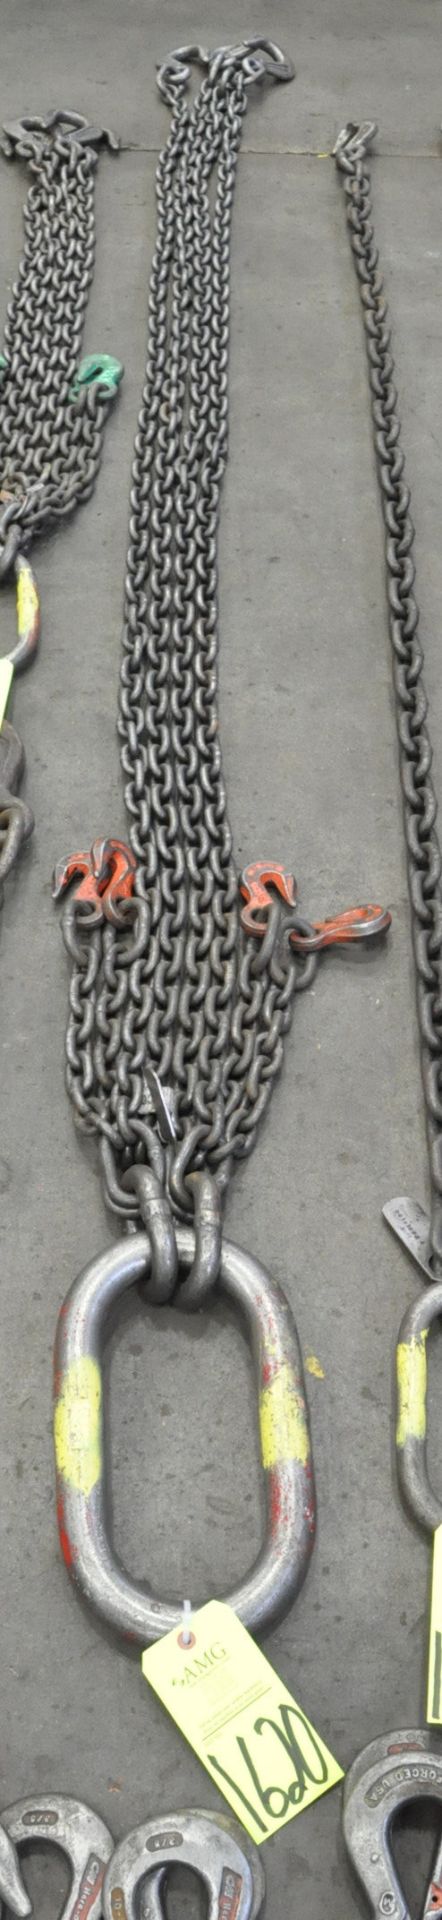 3/8" Link x 9' 6" Long 4-Hook Chain Sling with (4) Chokers), Cert Tag, (G-23), (Yellow Tag)